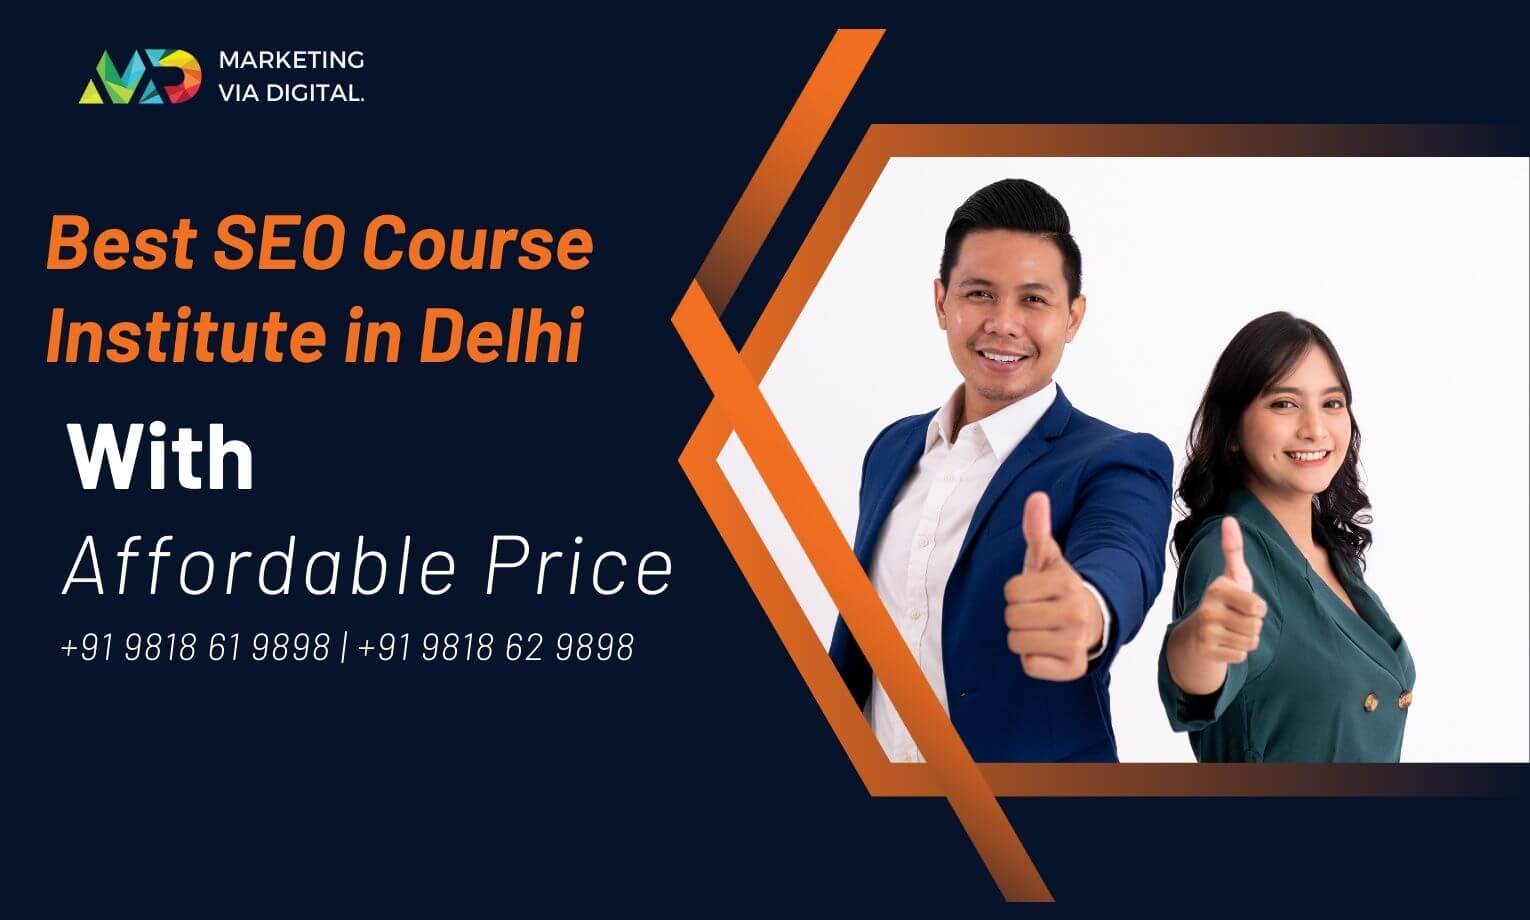 Best SEO course institute in Delhi with an affordable price